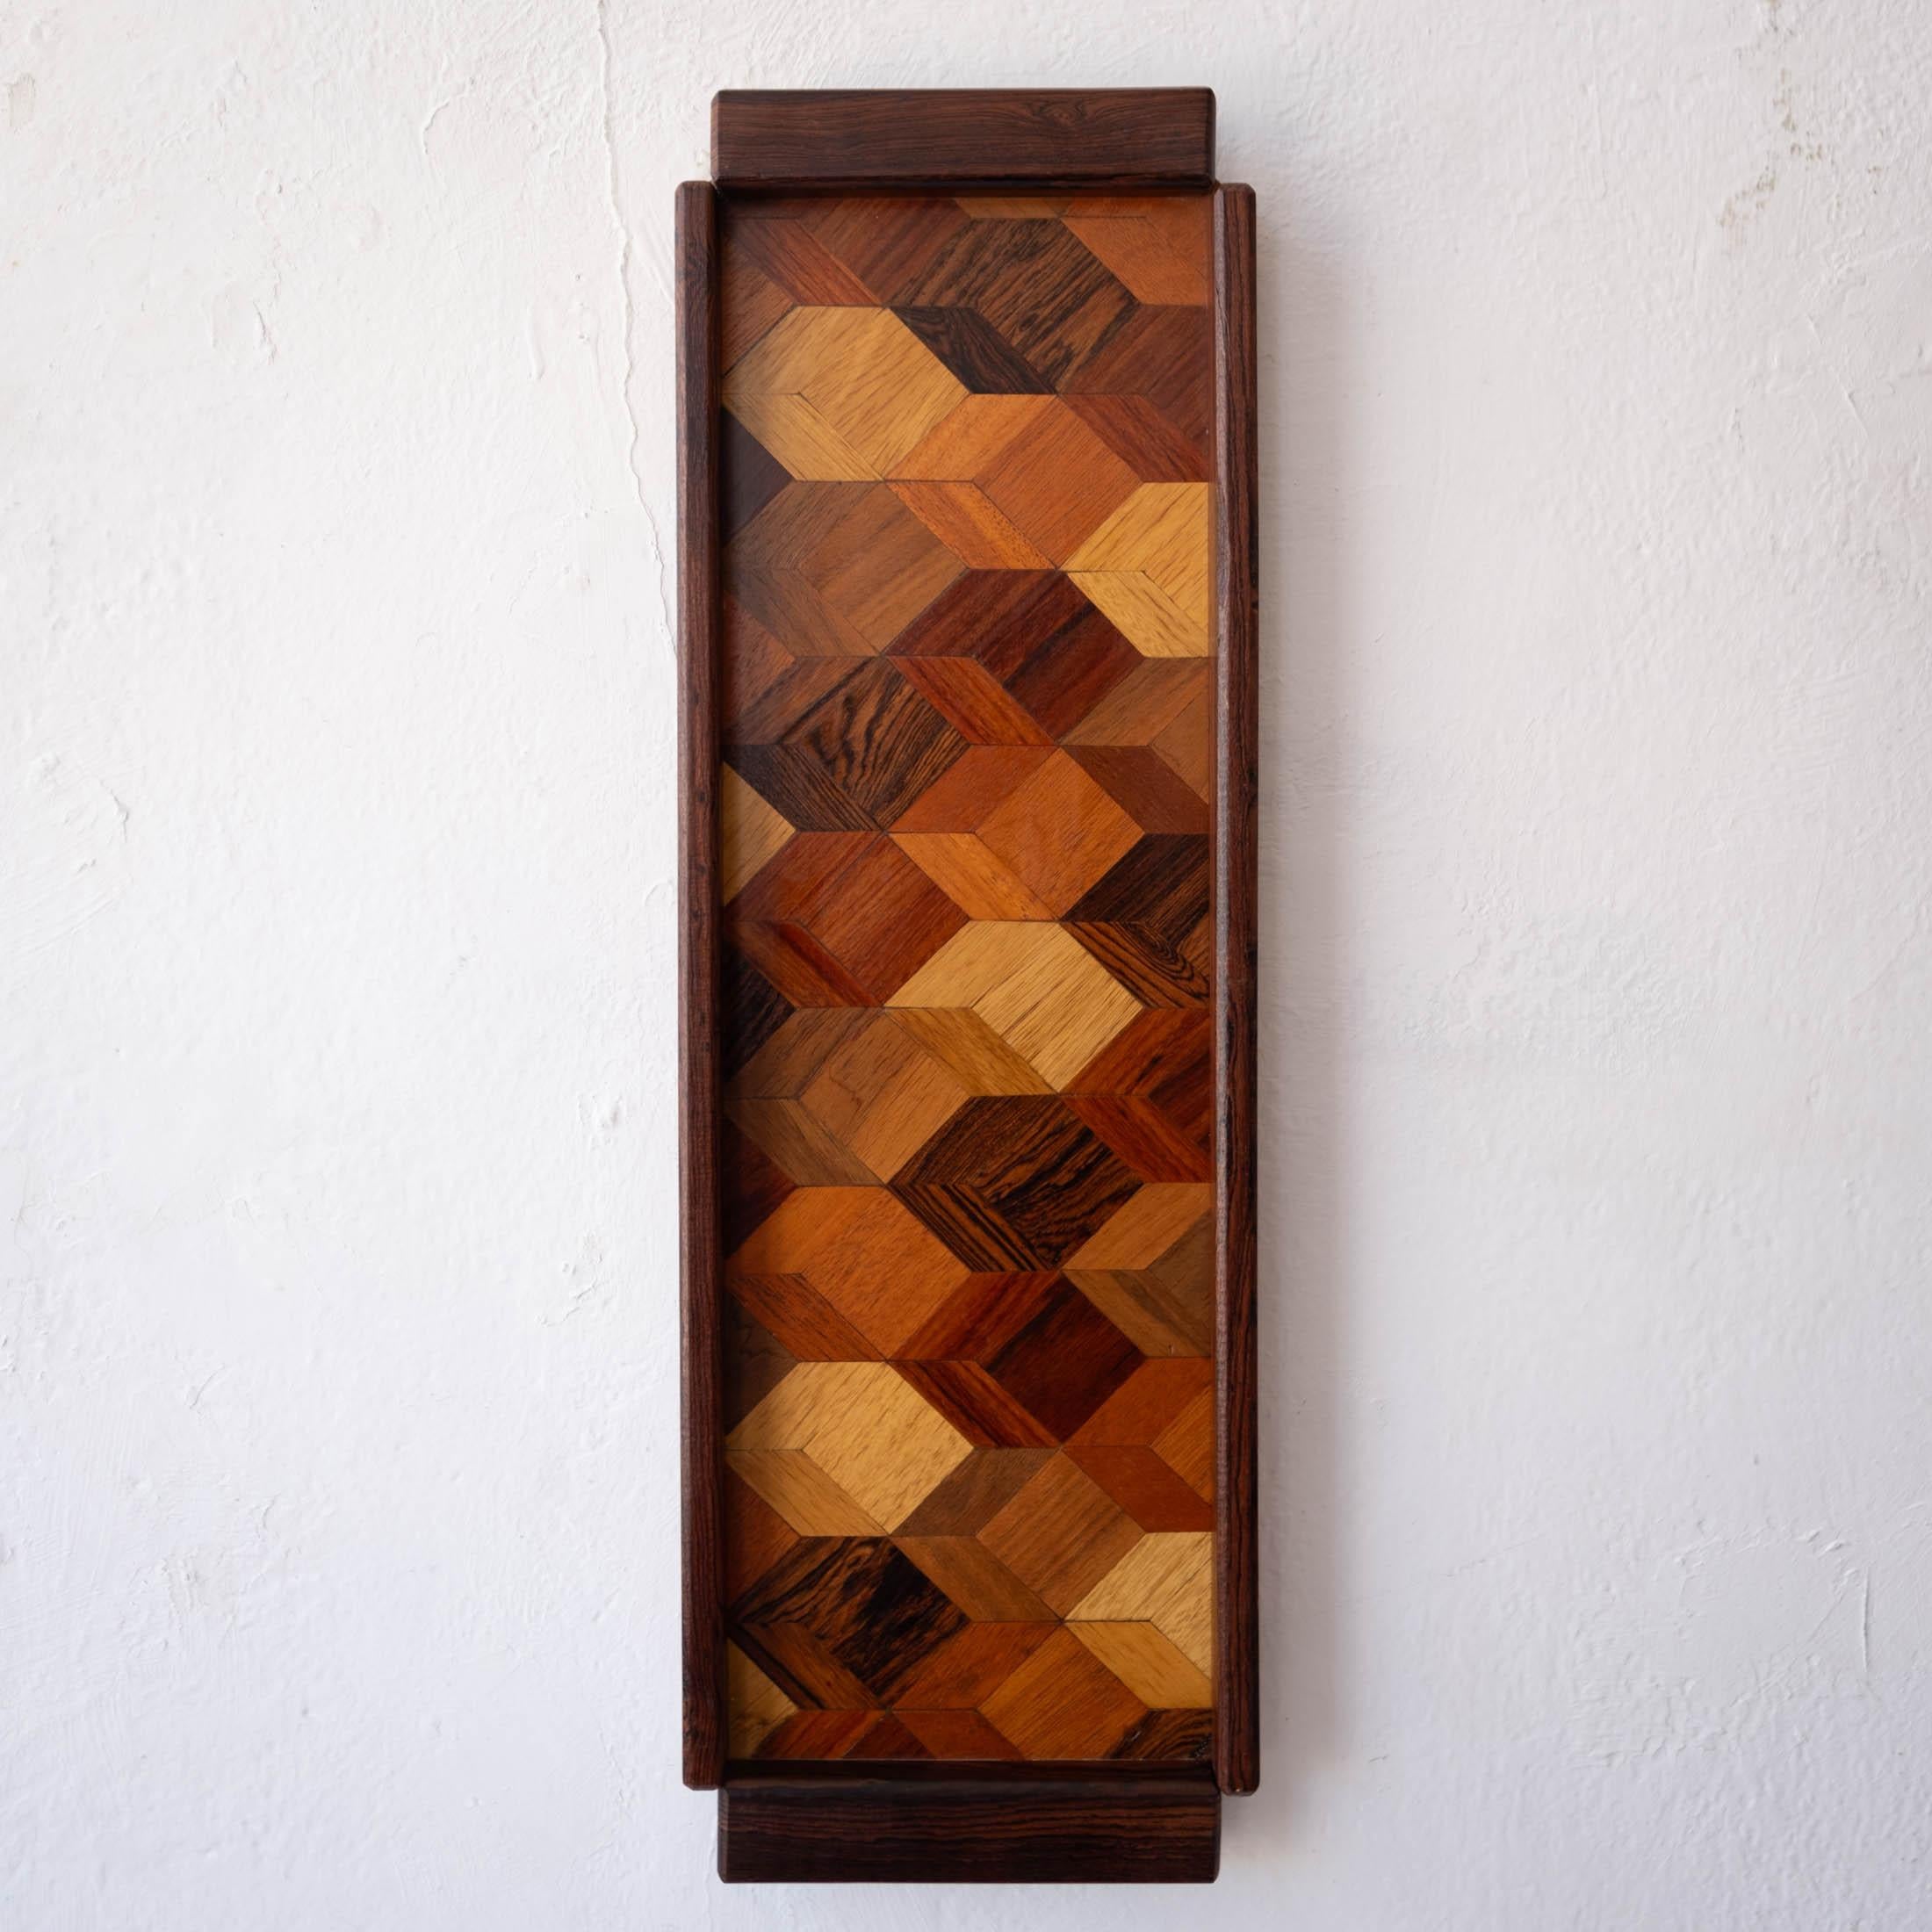 Tray by Mexican Modernist Don Shoemaker, from his workshop in Señal Mexico. Beautiful geometric inlaid marquetry of mixed exotic woods. Can be mounted on the wall. 

Designer Don Shoemaker ( was born in Nebraska and studied at the Art Institute of